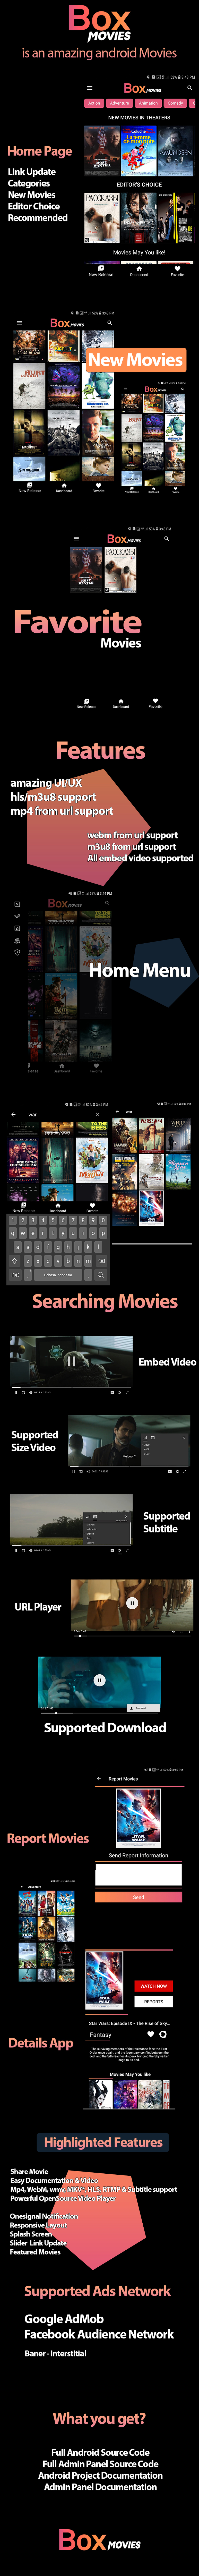 Box Movies - Video Streaming and Movie Android App